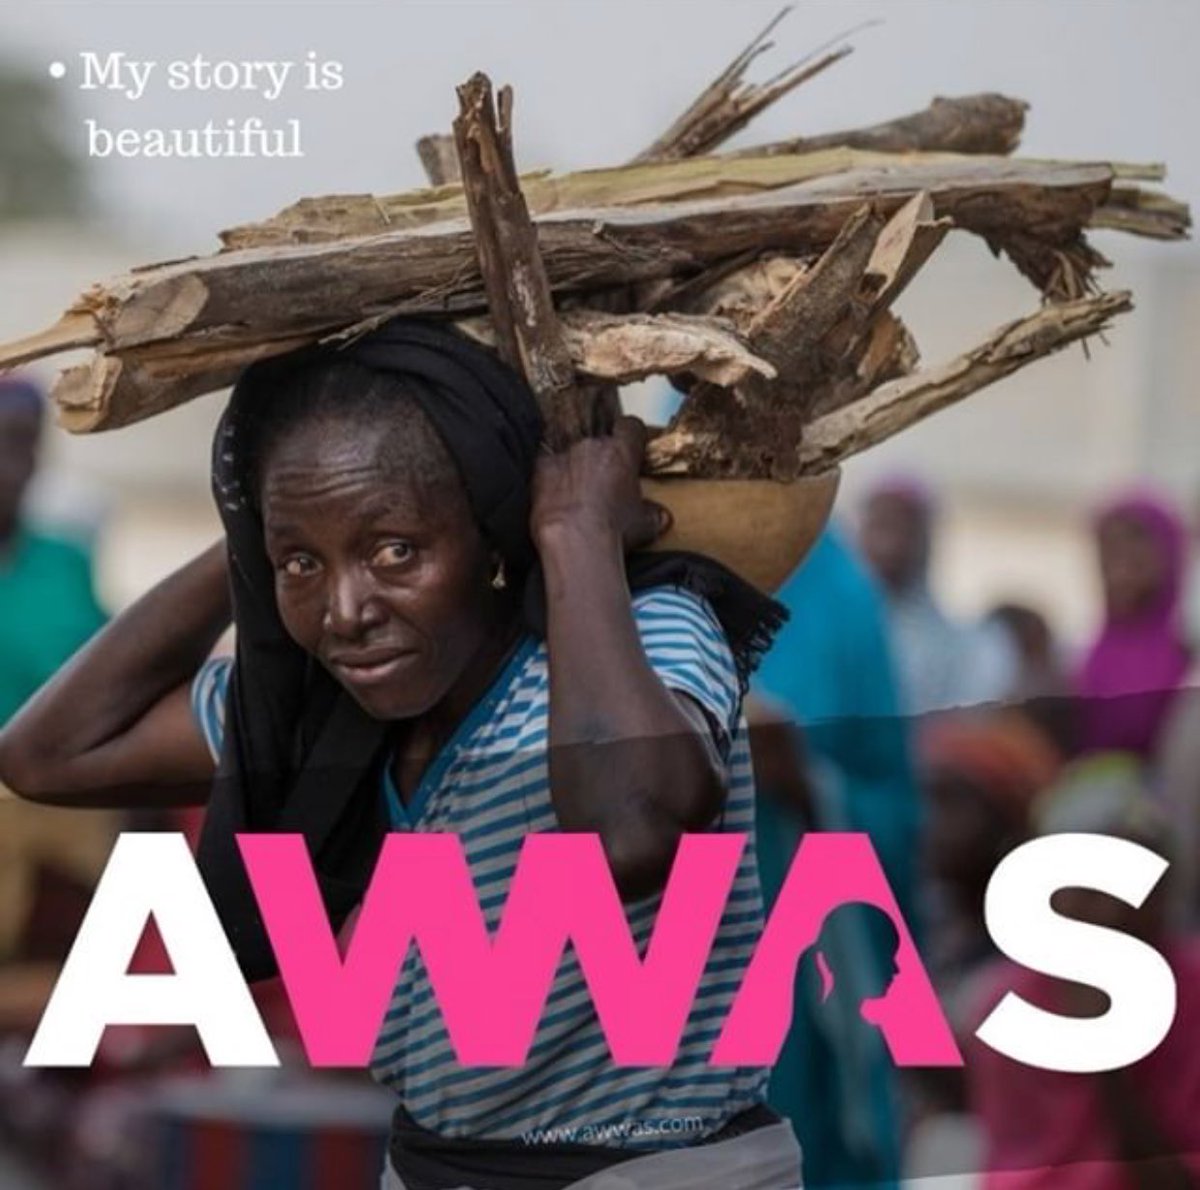 Today in Abuja: A #AWWAS Photography Exhibition - WOMEN MADE FOR PURPOSE: Changing the narrative. #AWomanWithAStory 

5PM at @TPArtGallery.